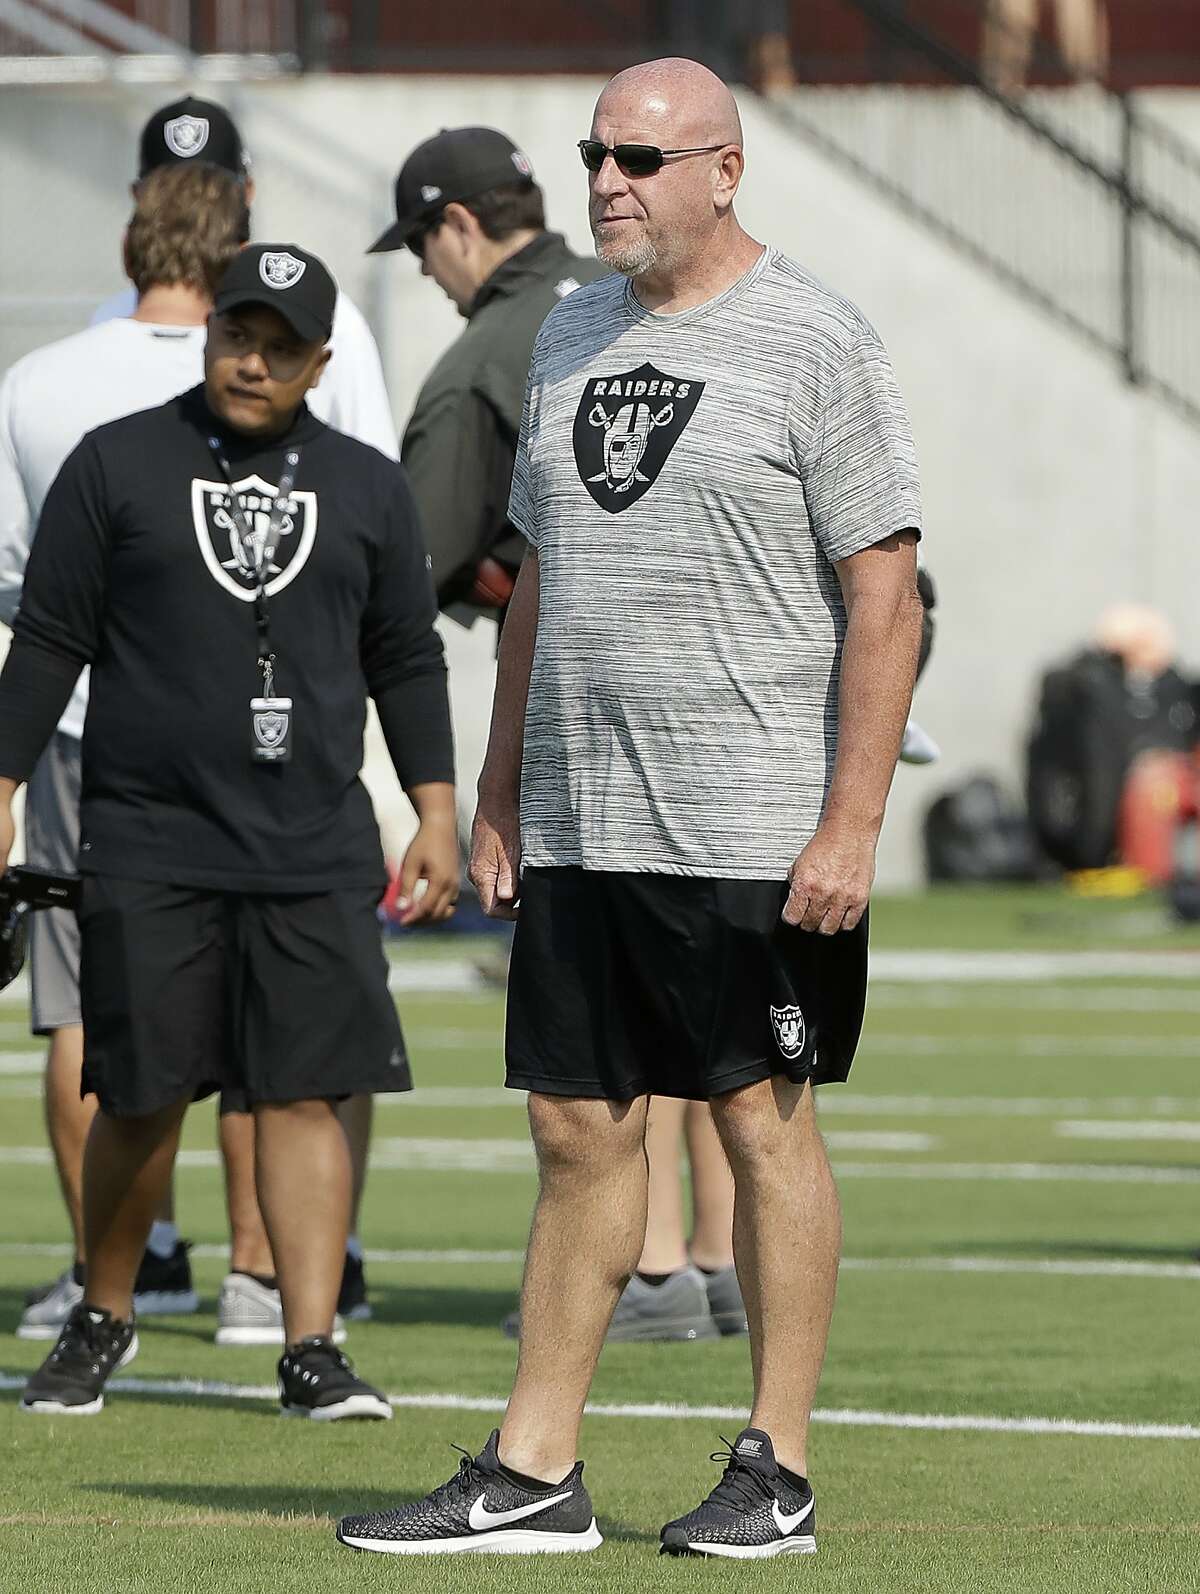 Oakland Raiders offensive line coach Tom Cable watches during NFL football practice in Napa, Calif., Saturday, July 28, 2018. (AP Photo/Jeff Chiu)